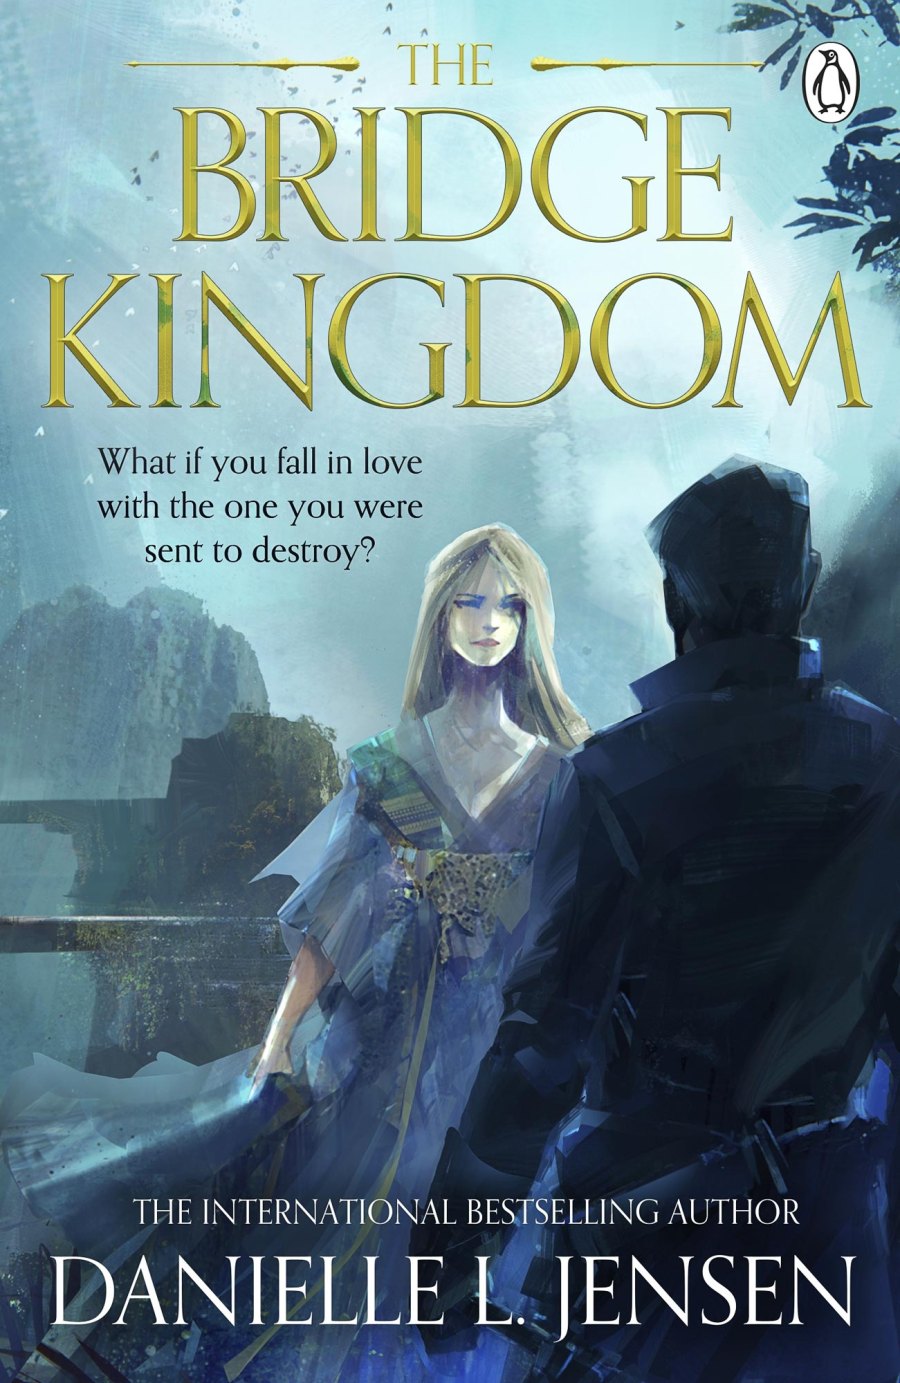 If You re a Fan of Sarah J Maas You Need to Read These Romantasy Books ASAP The Bridge Kingdom by Danielle L Jensen 061